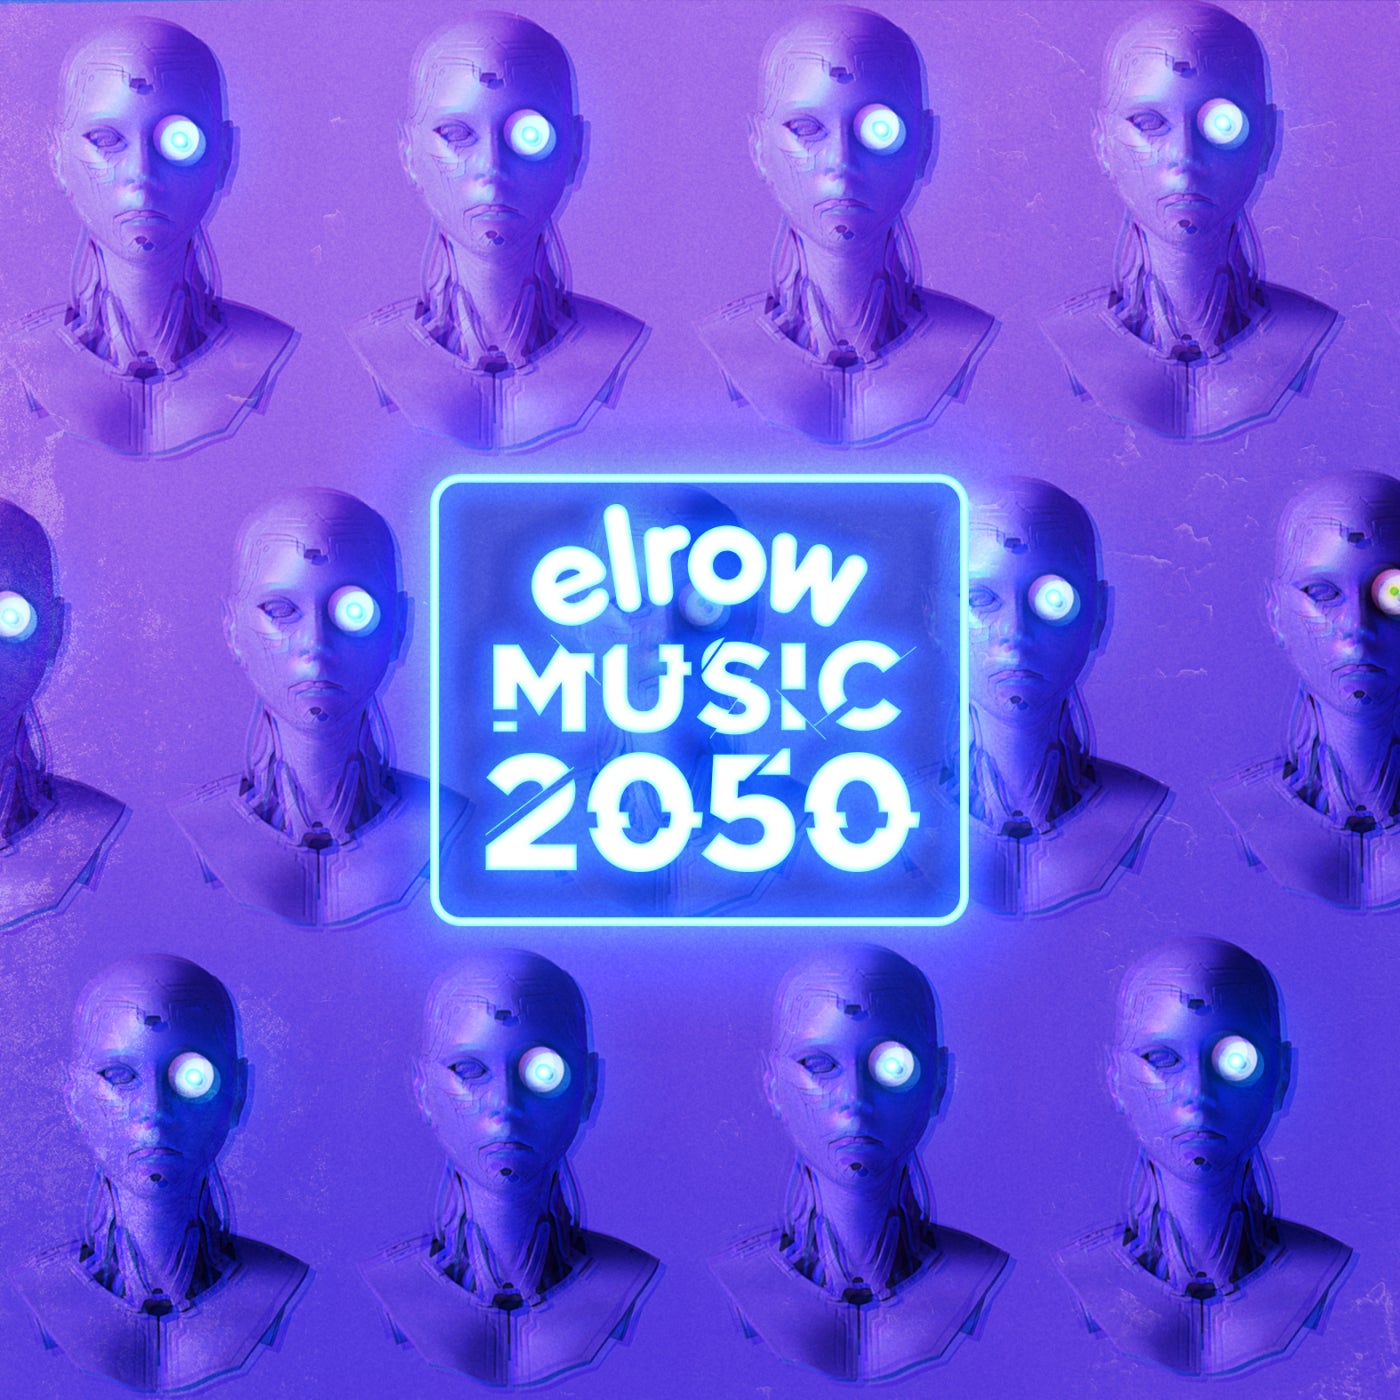 Download elrow music 2050 on Electrobuzz